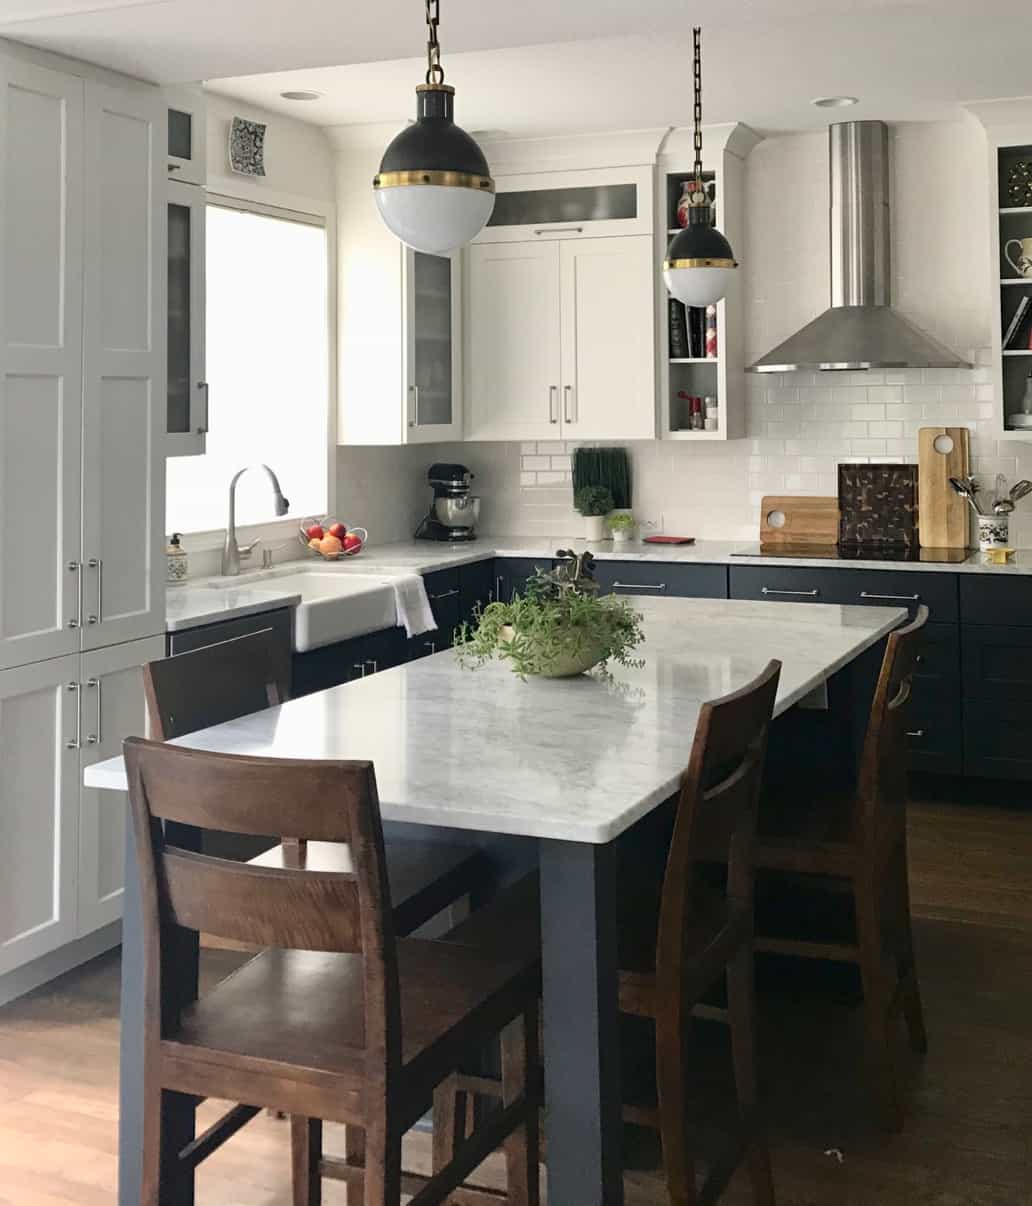 Classic kitchen with carrara marble counters